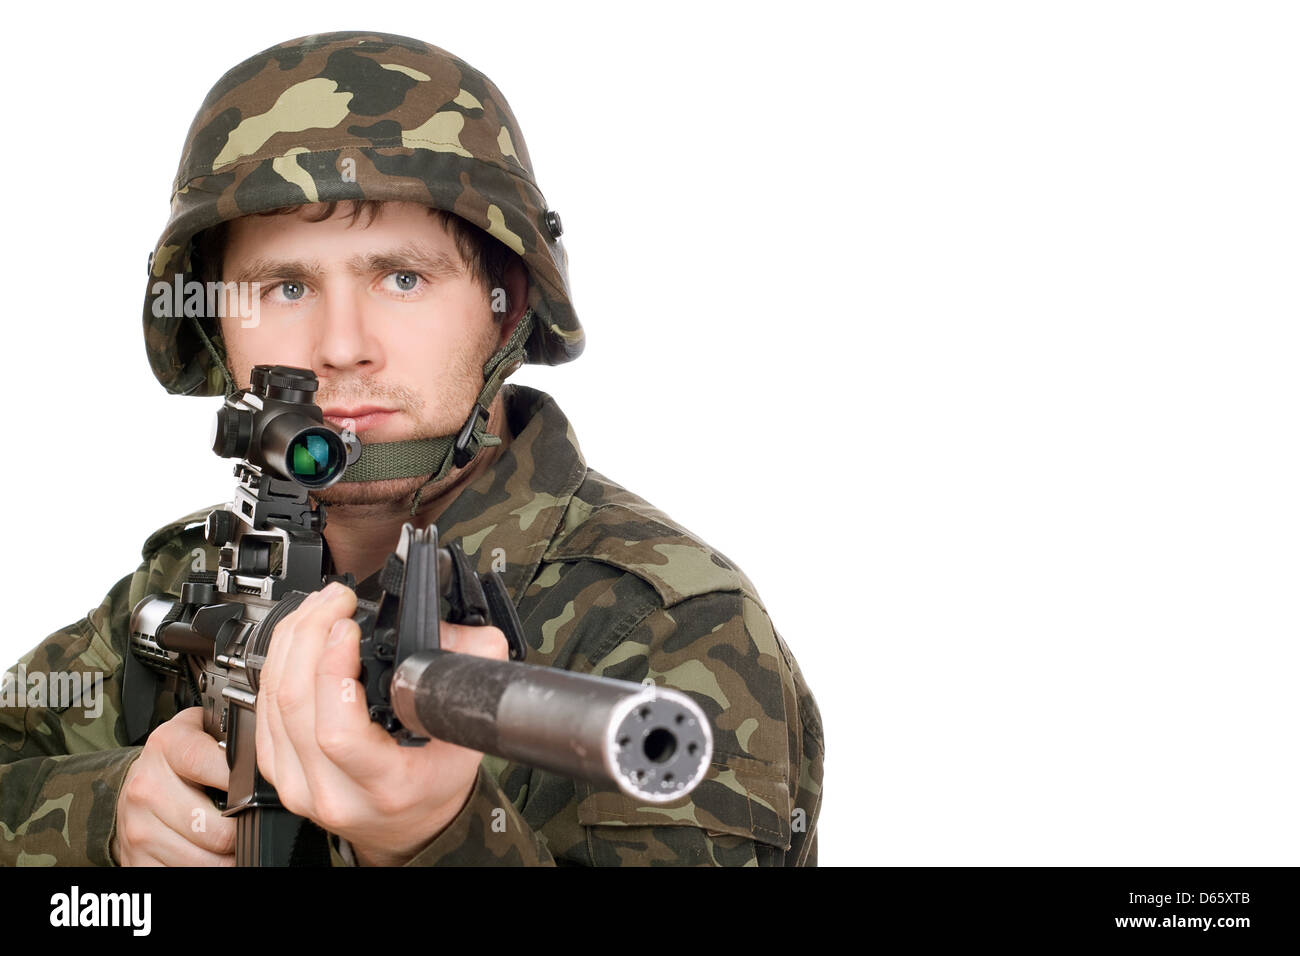 Armed soldier pointing m16 Stock Photo